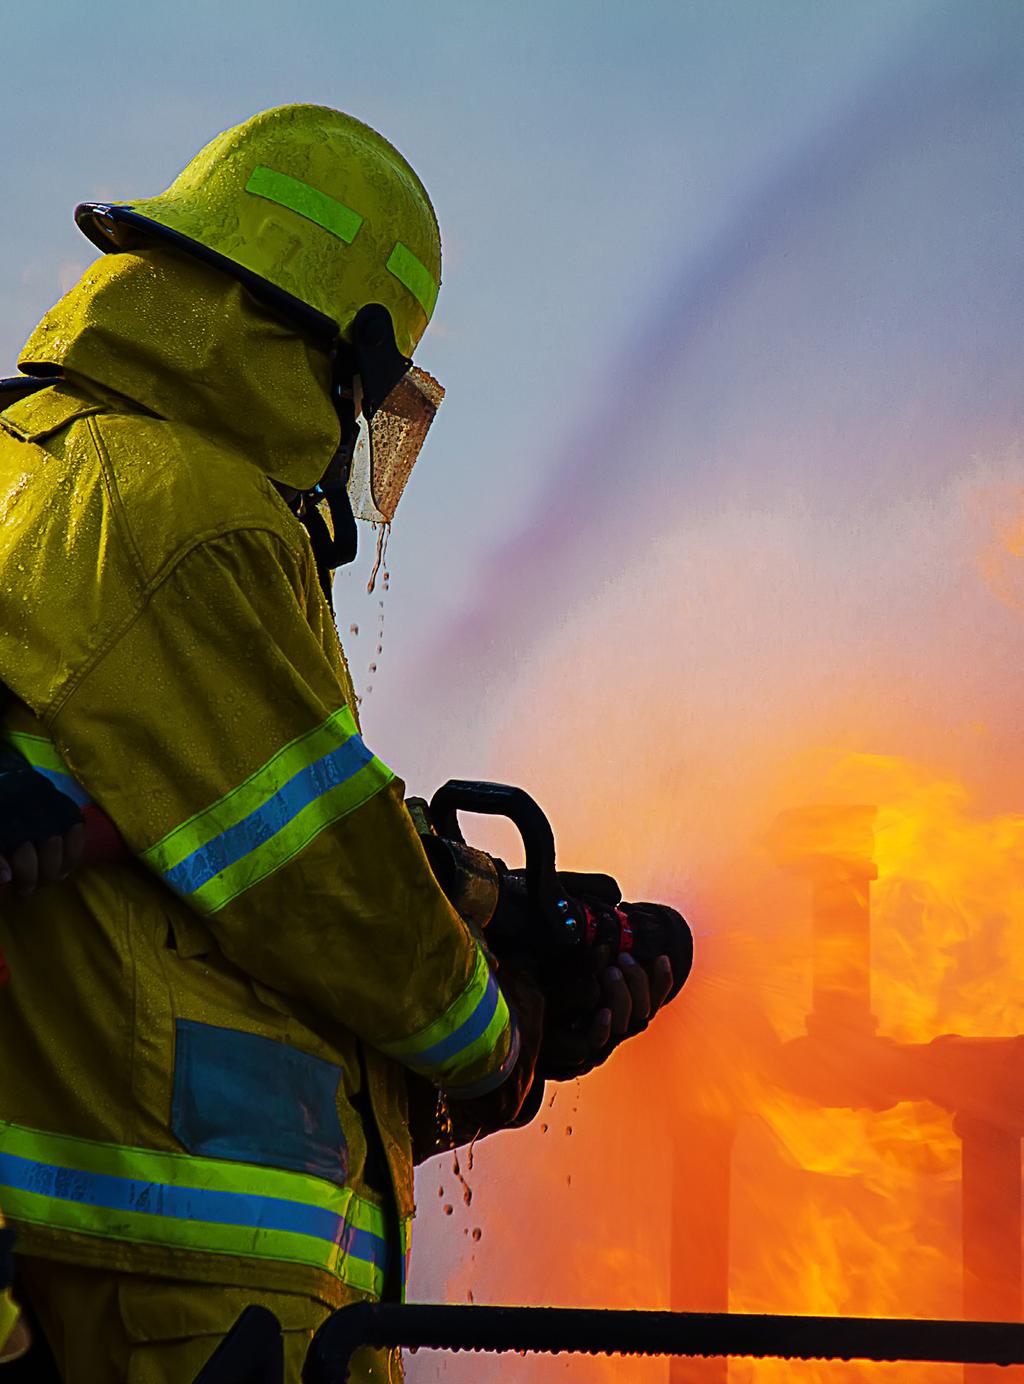 The IPS fire services staff consists of highly trained individuals that all hold different level of certification including: NFPA 1001 Level I and II NFPA 472 Operations